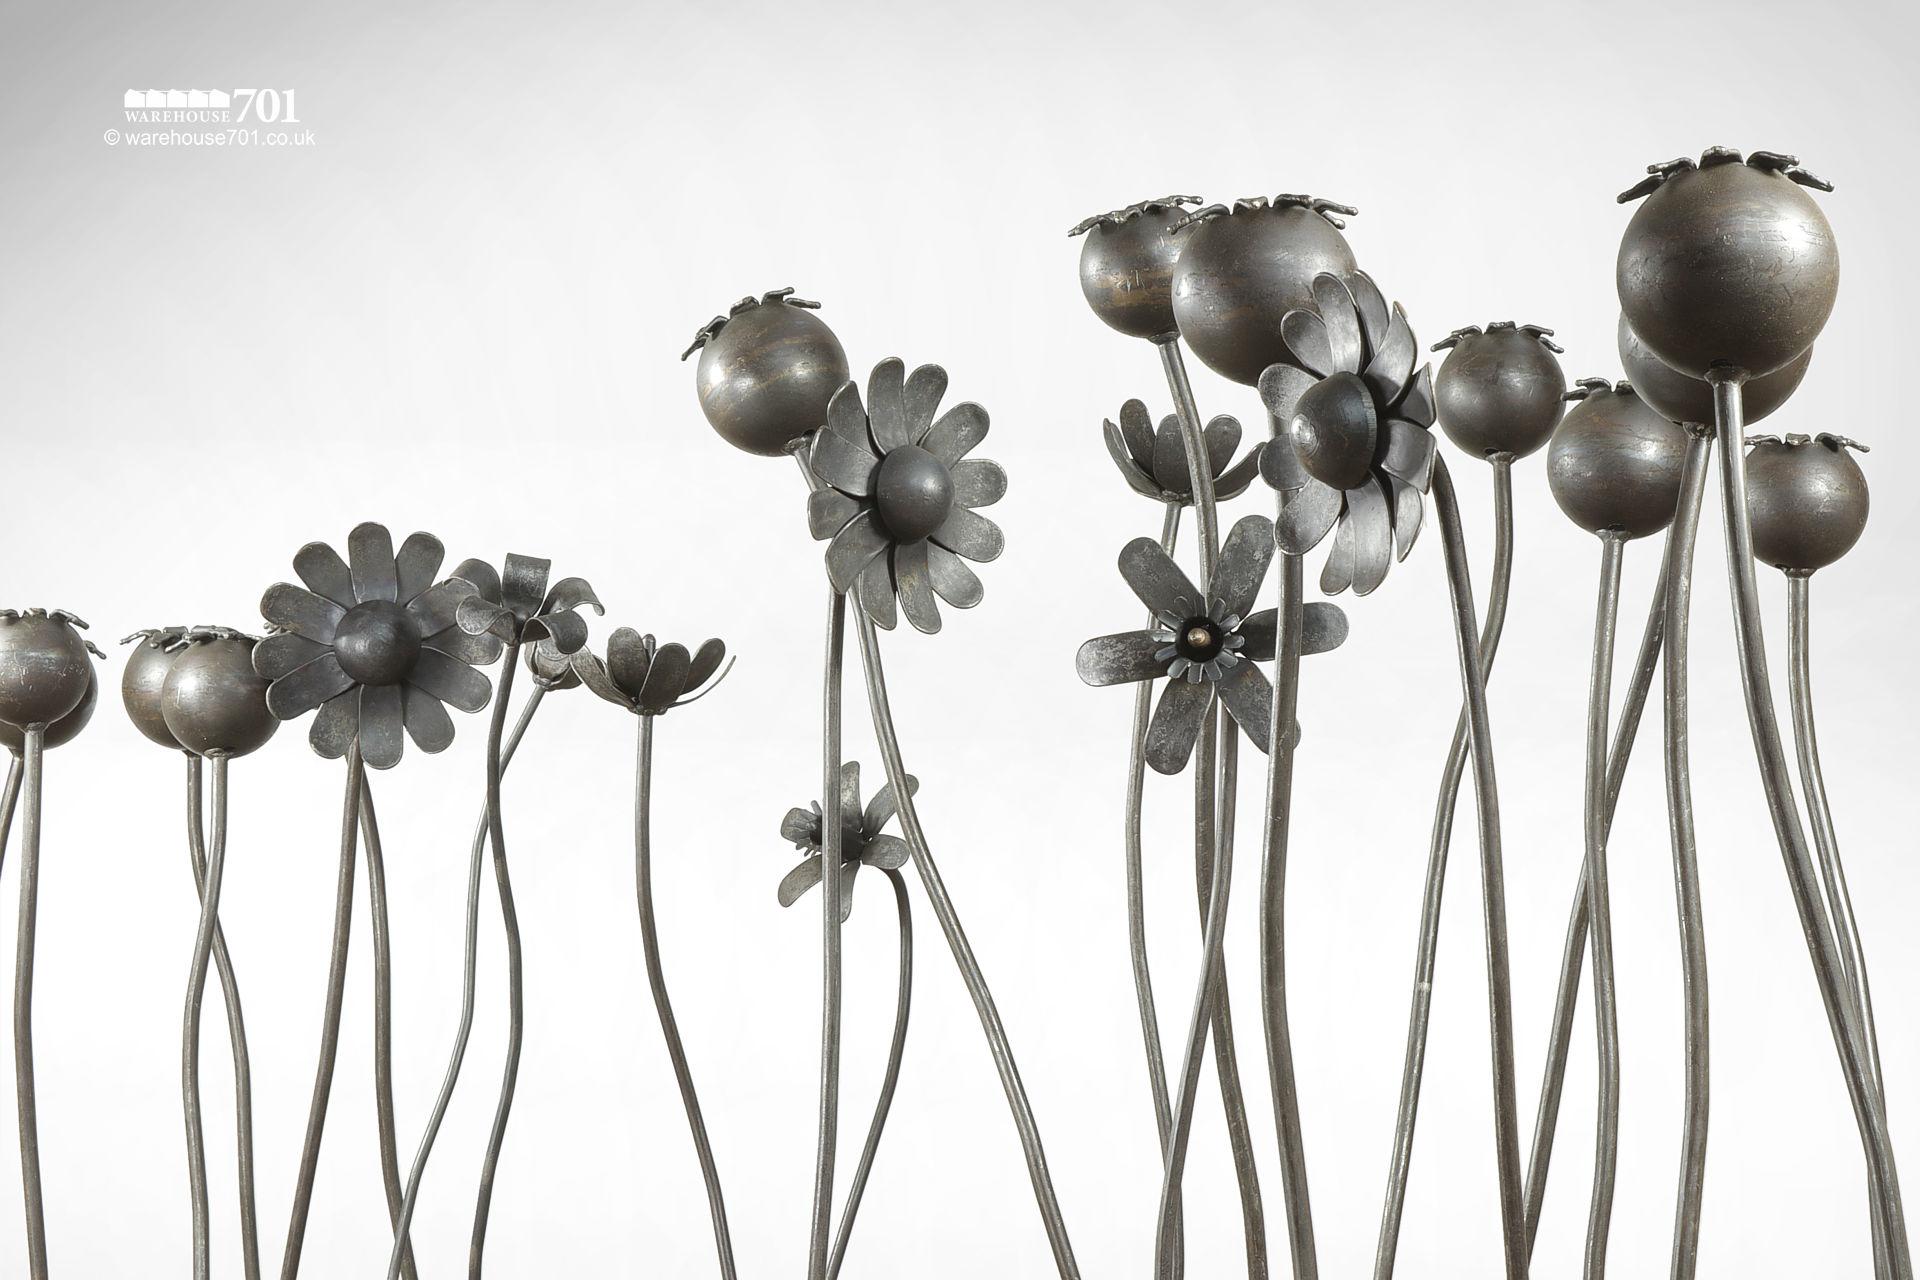 NEW Full Sized Sculptured Hand Made Metal Flowers and Fungi #5